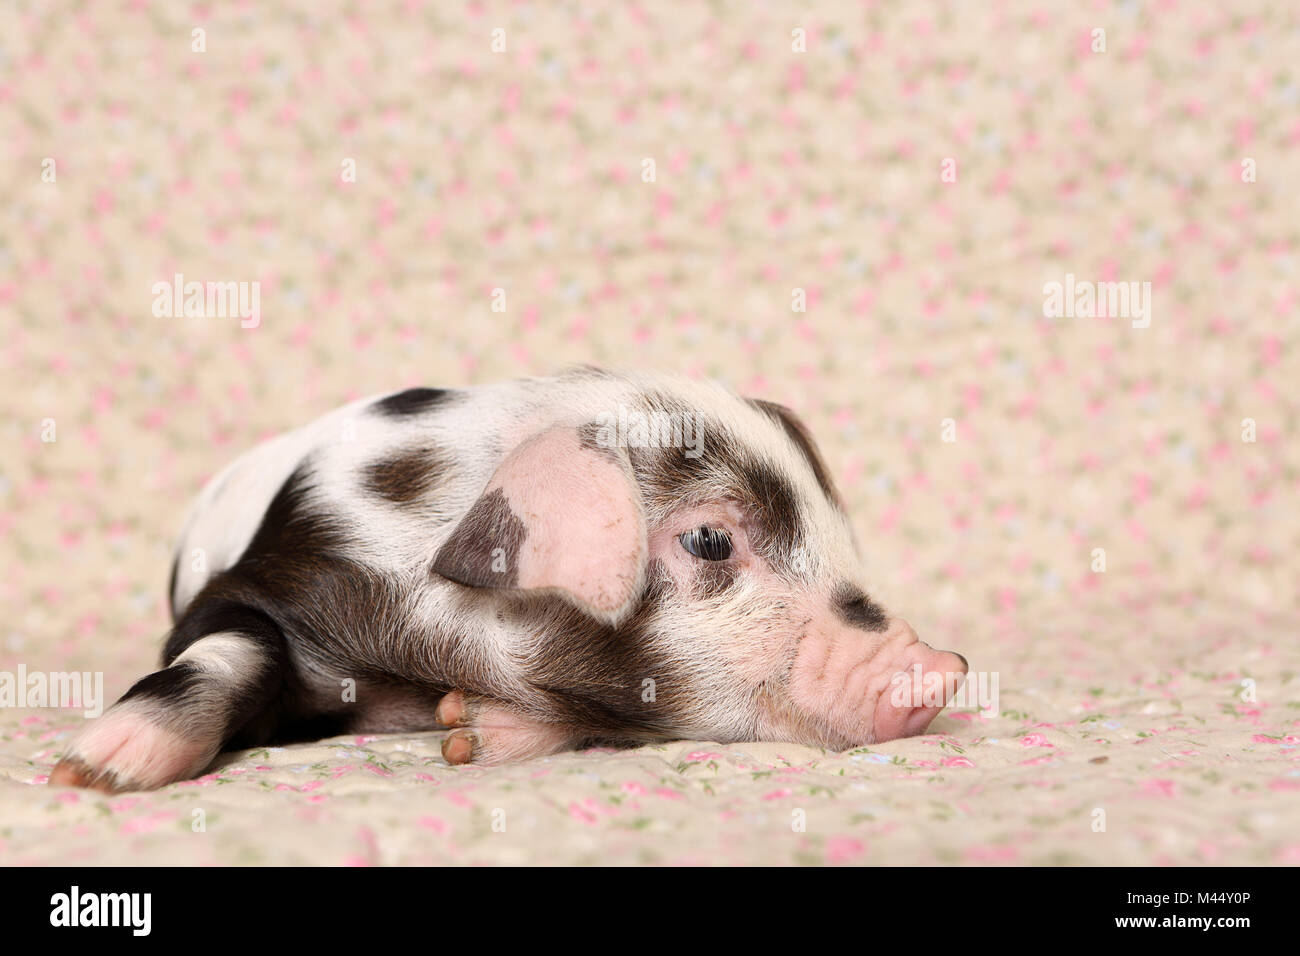 Domestic Pig, Turopolje x ?. Piglet (4 weeks old) lying on a blanket with flower print. Studio picture. Germany Stock Photo